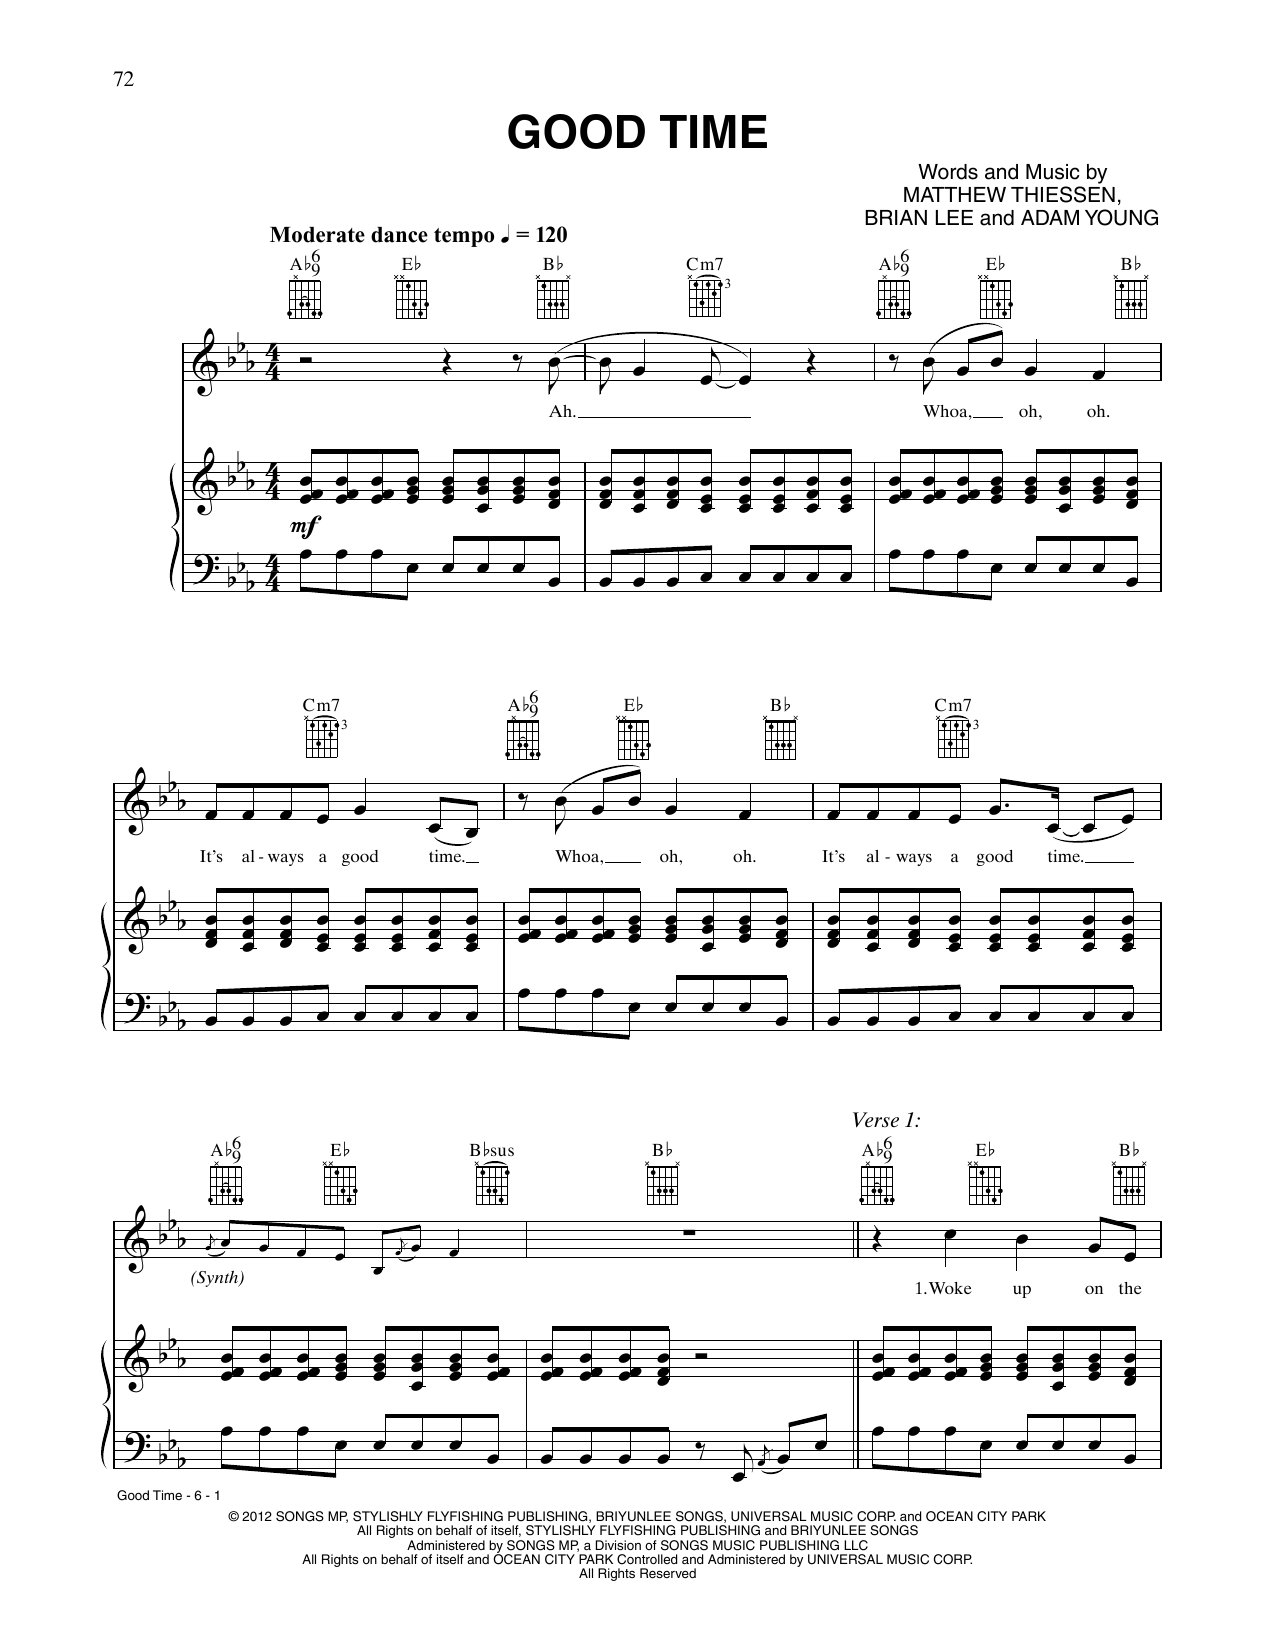 Download Owl City and Carly Rae Jepsen Good Time Sheet Music